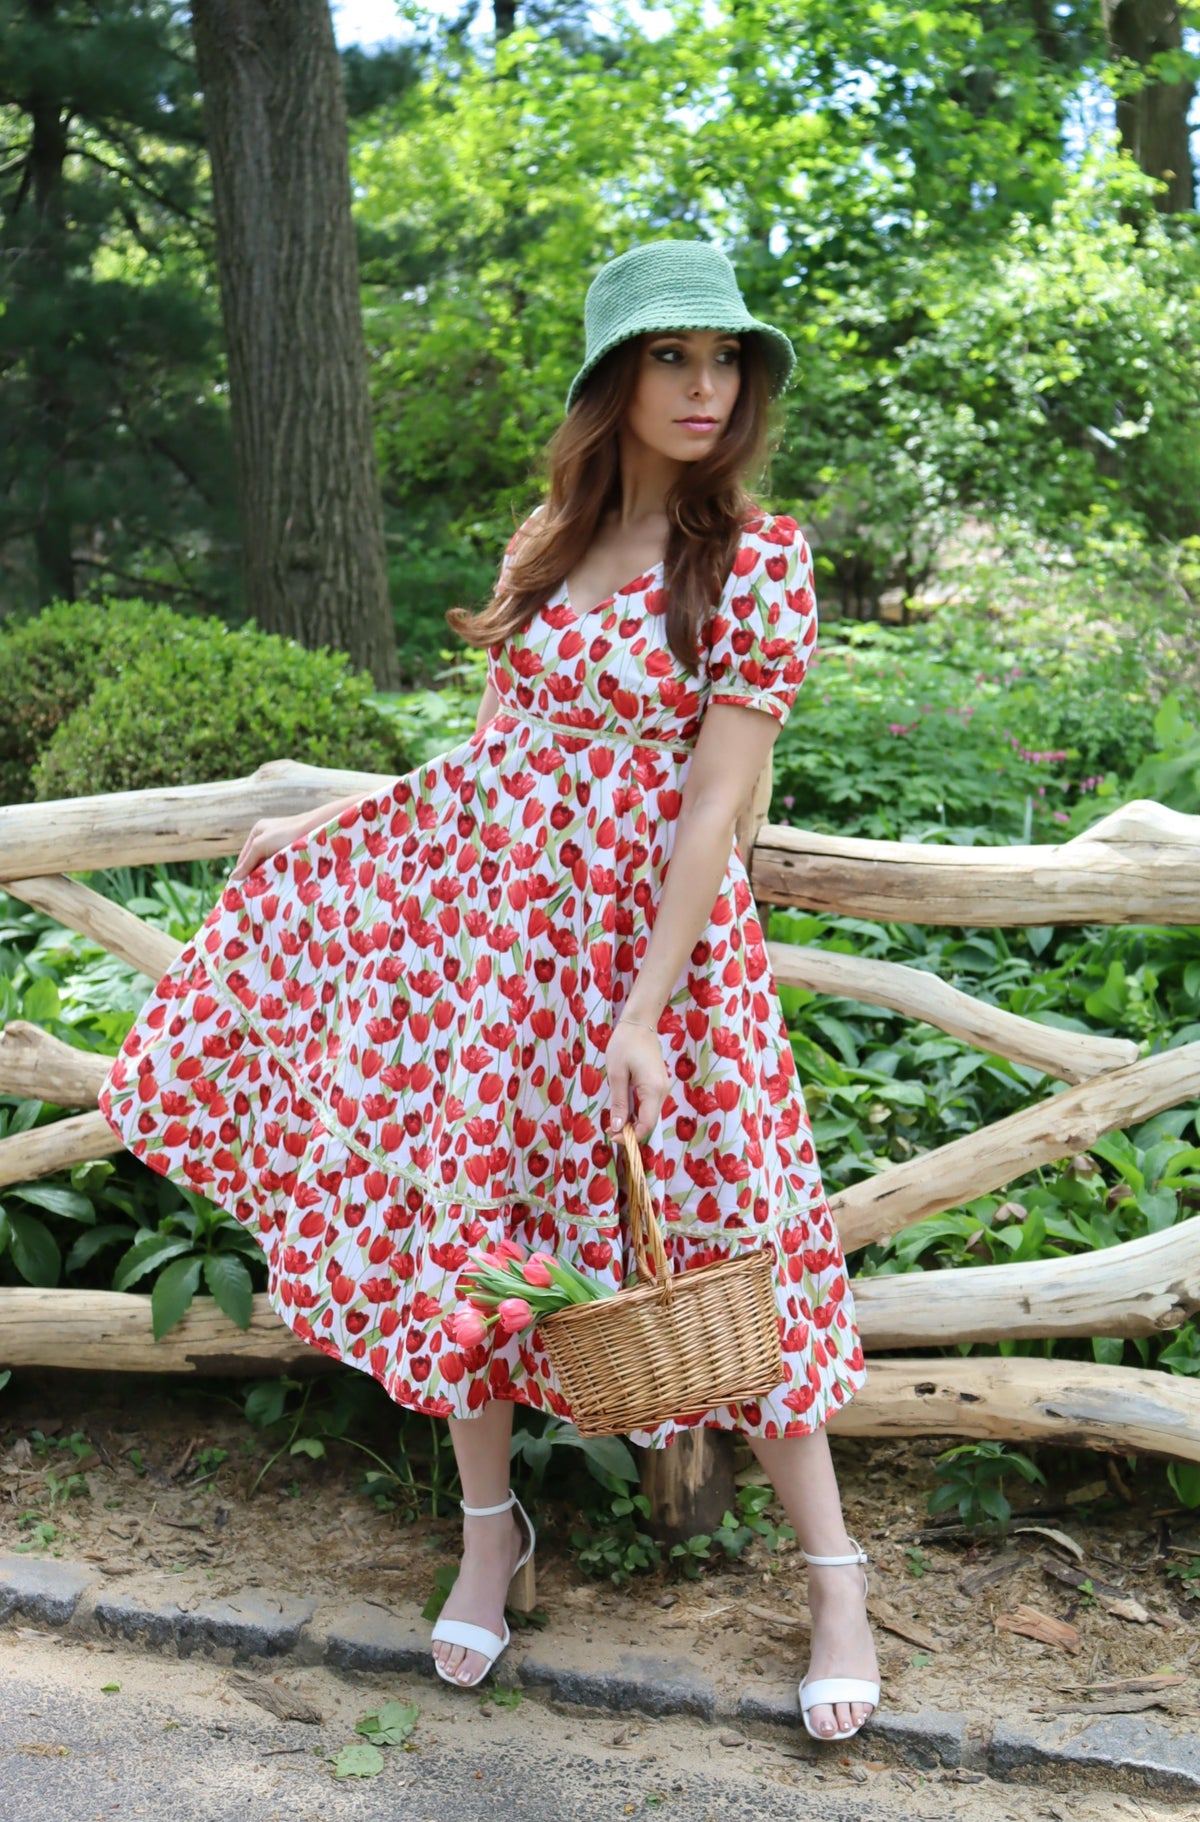 Model wearing midi length dress with a tulip print on white with a green bucket hat and holding a basket of tulips in front of a fence.